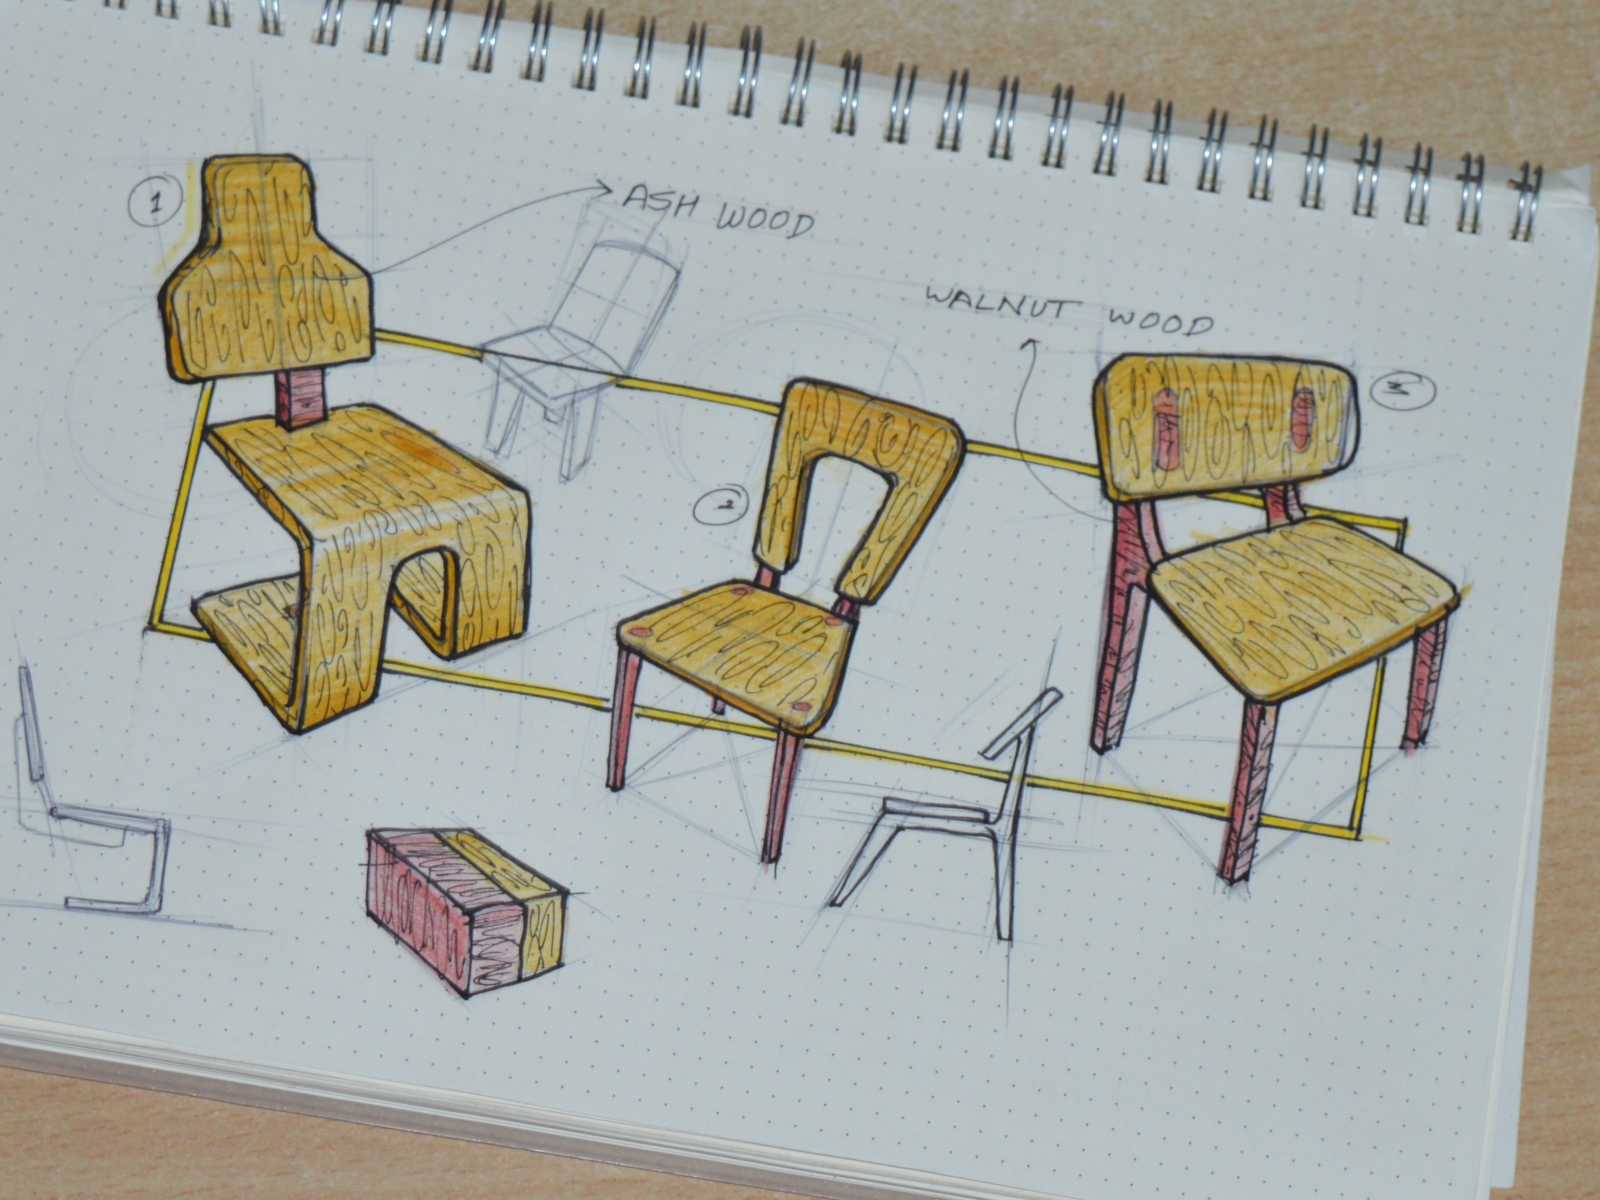 Armchair  Industrial  Product Design Sketching  YouTube